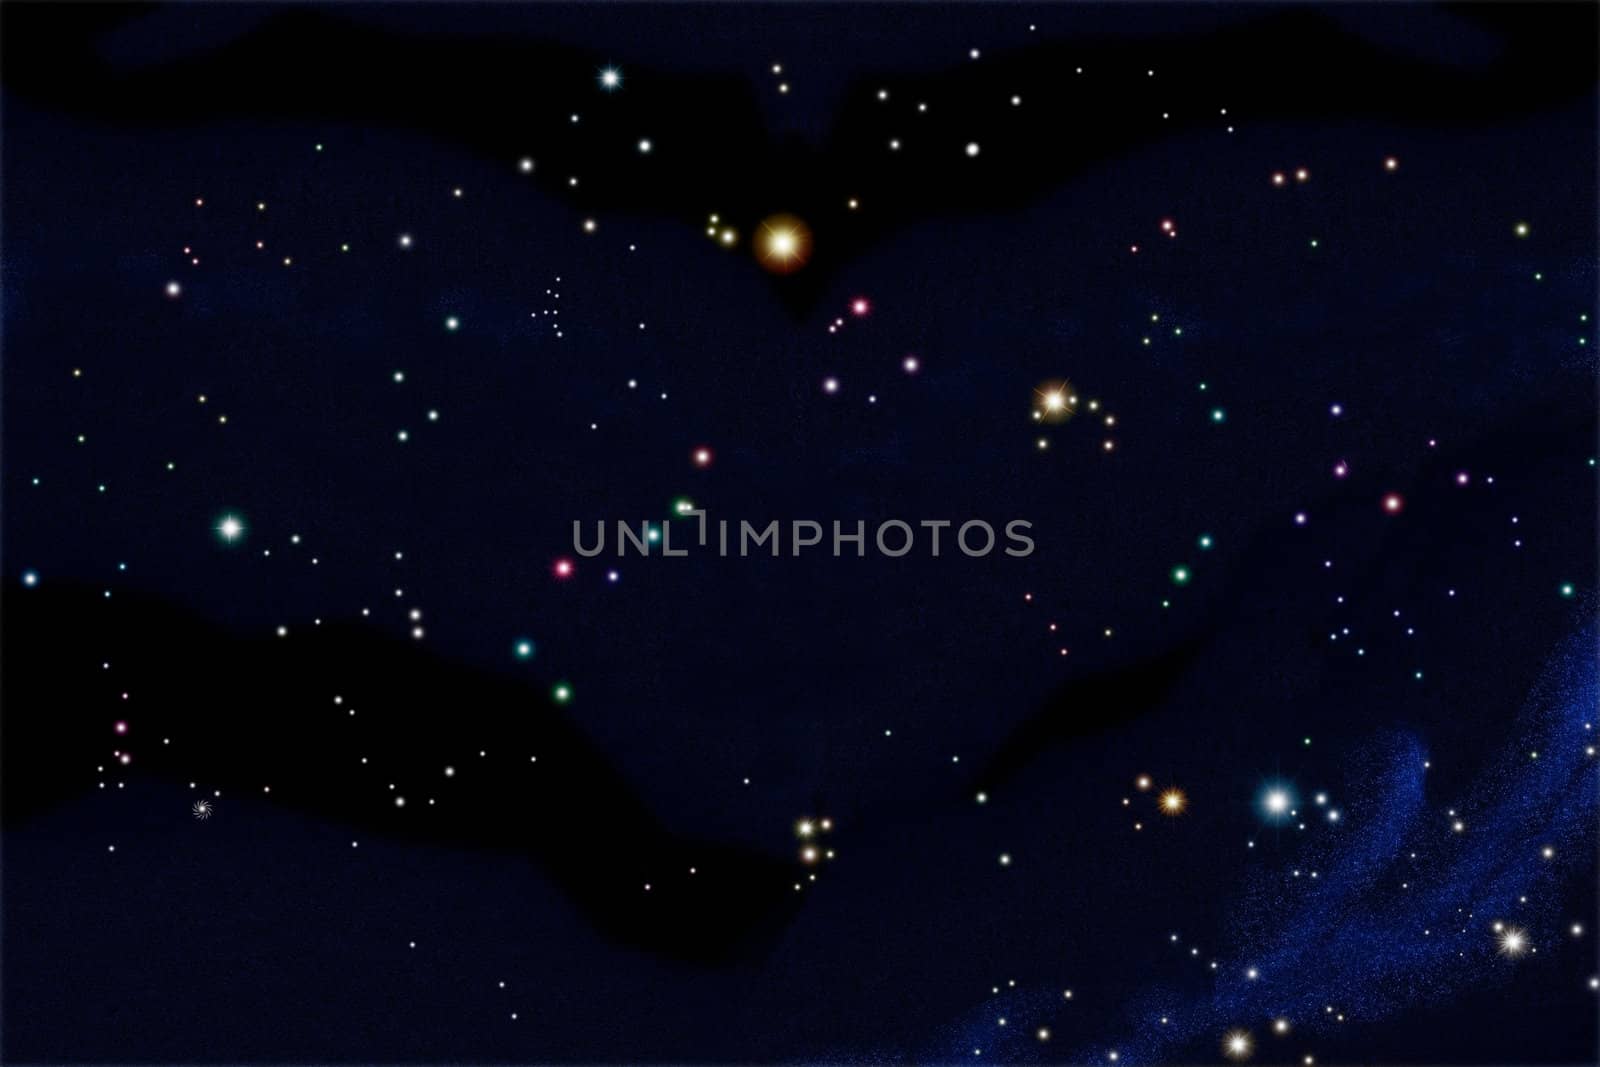 South sky star chart include 25 constellations arrange follow real position